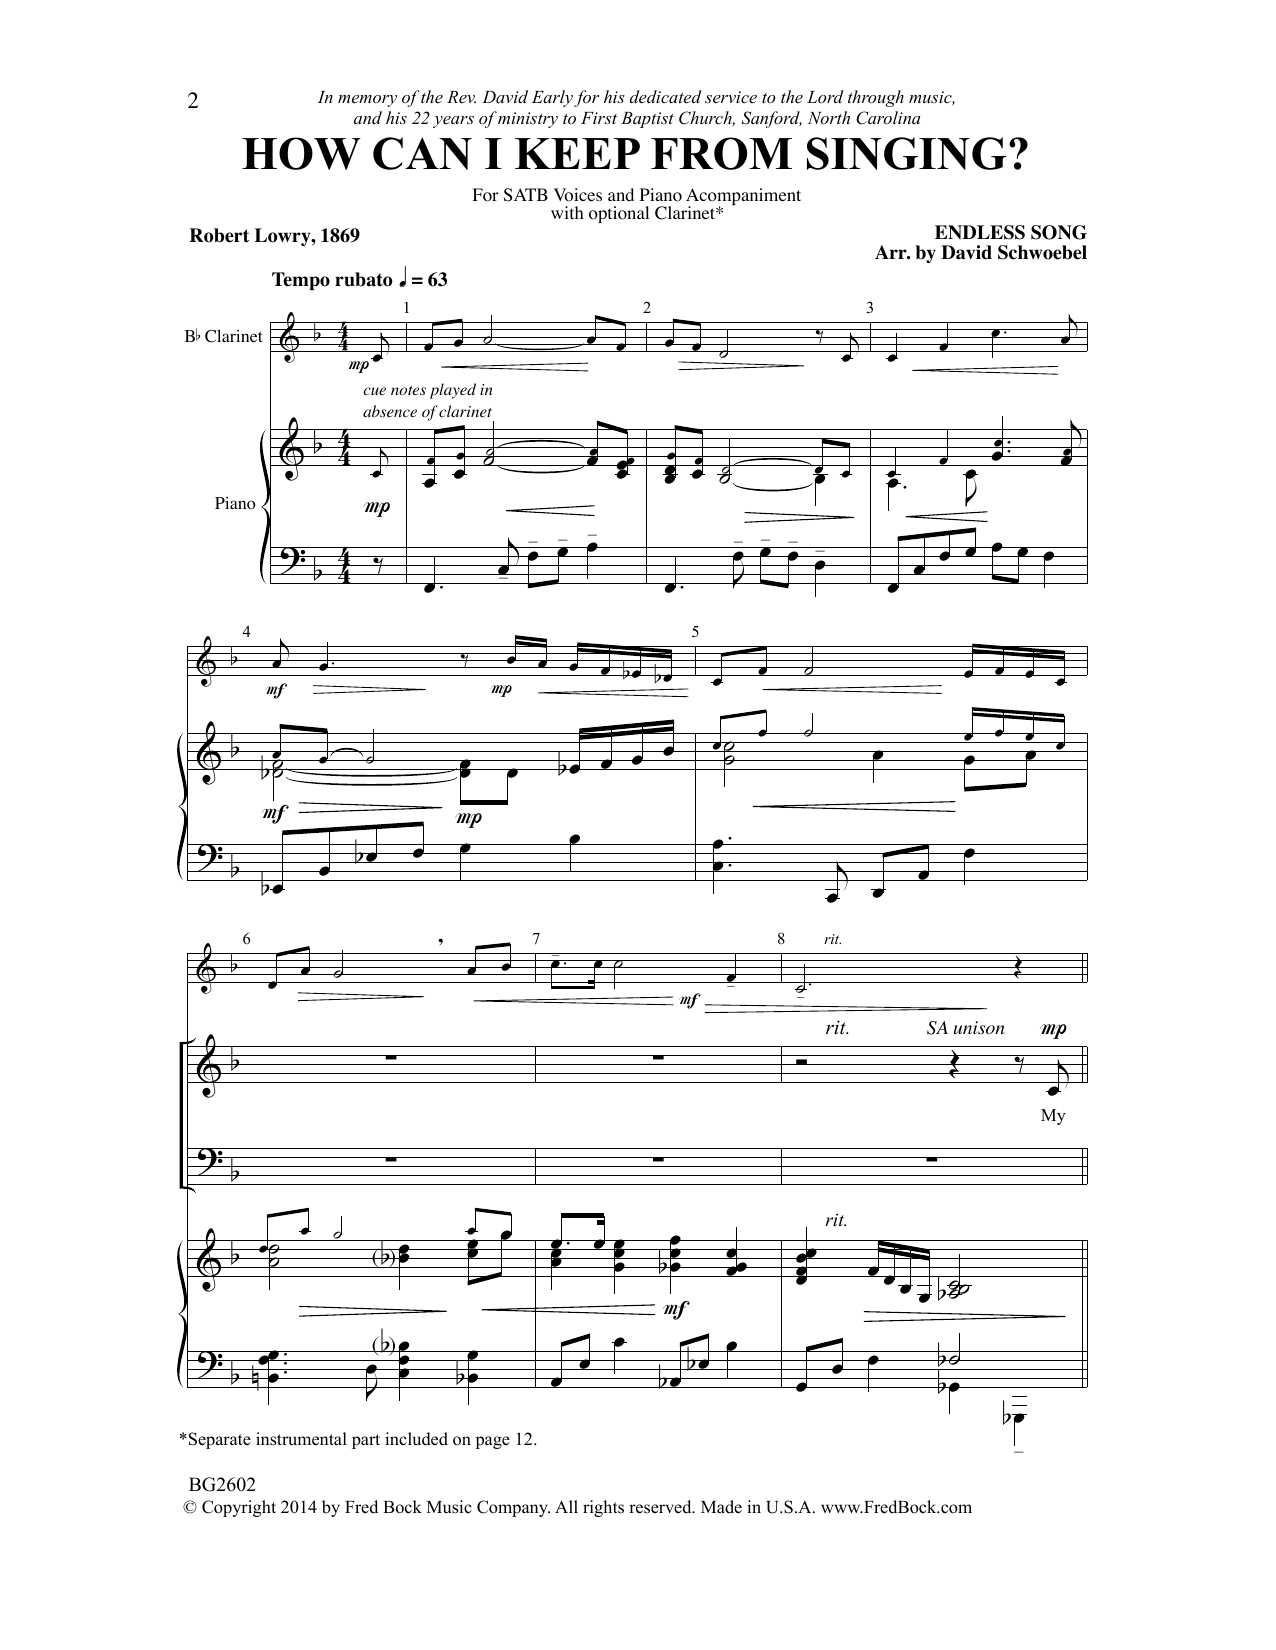 Download David Schwoebel How Can I Keep from Singing? Sheet Music